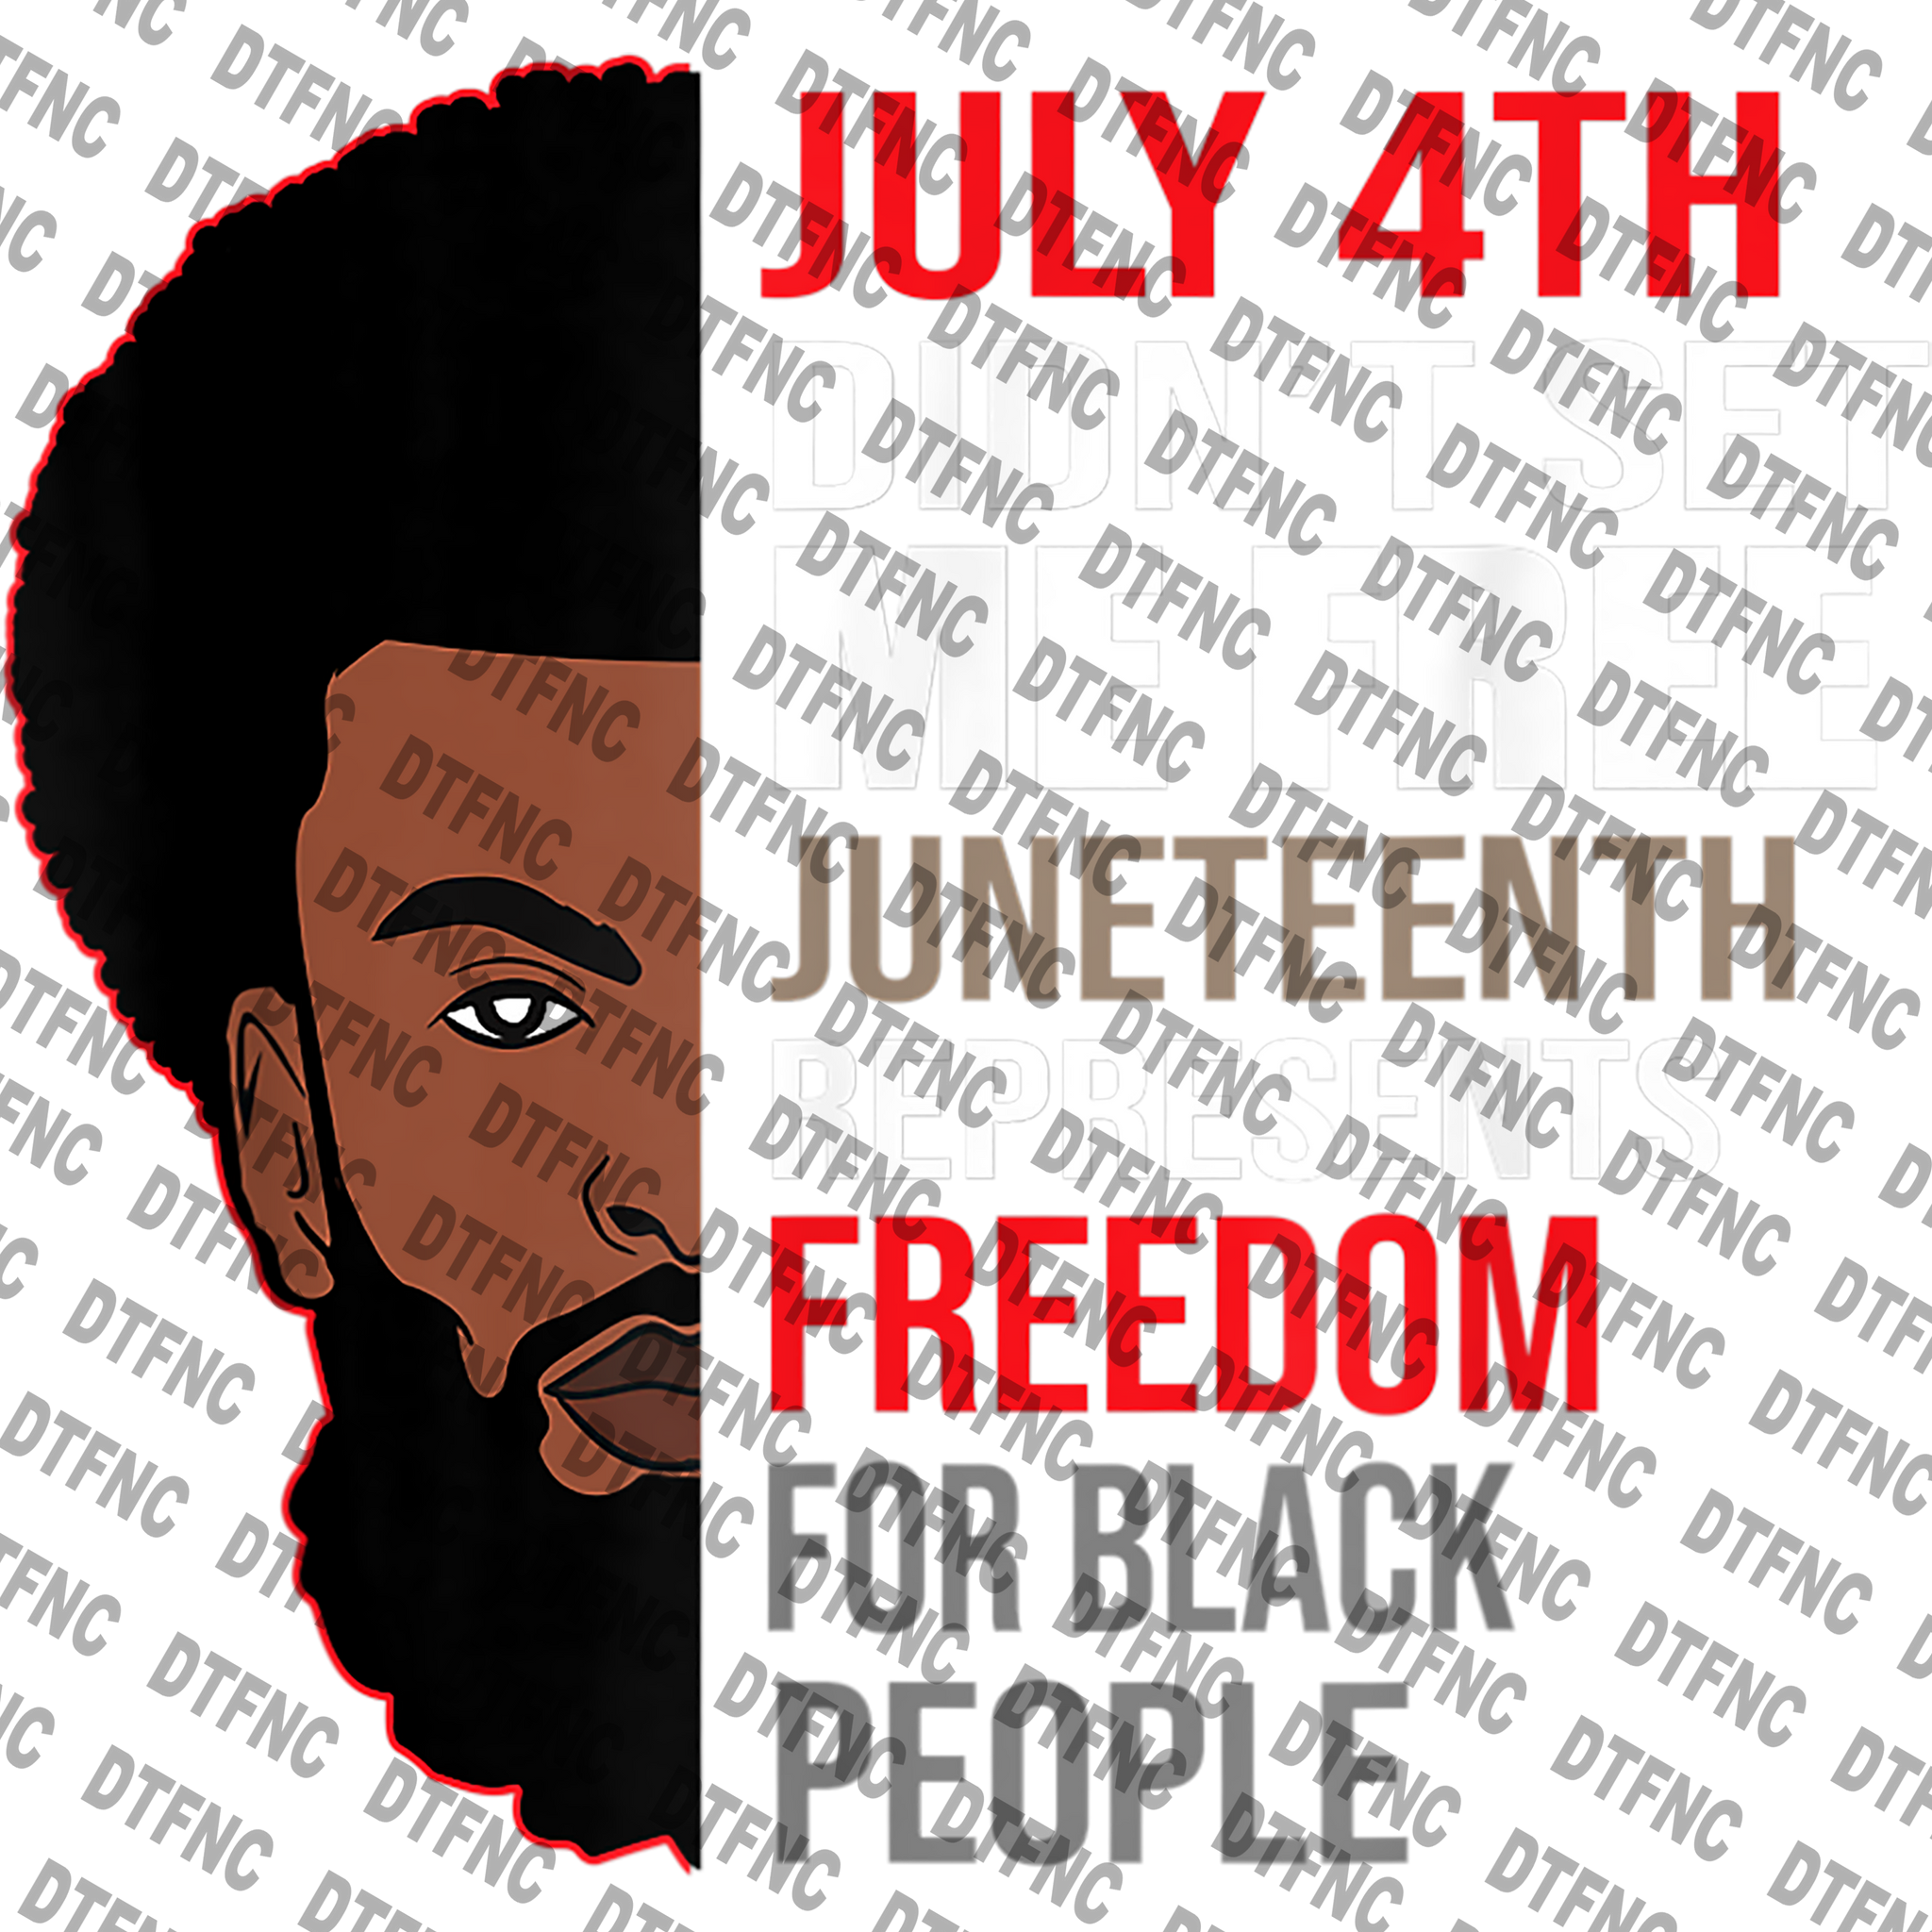 Juneteenth - Freedom For Black People